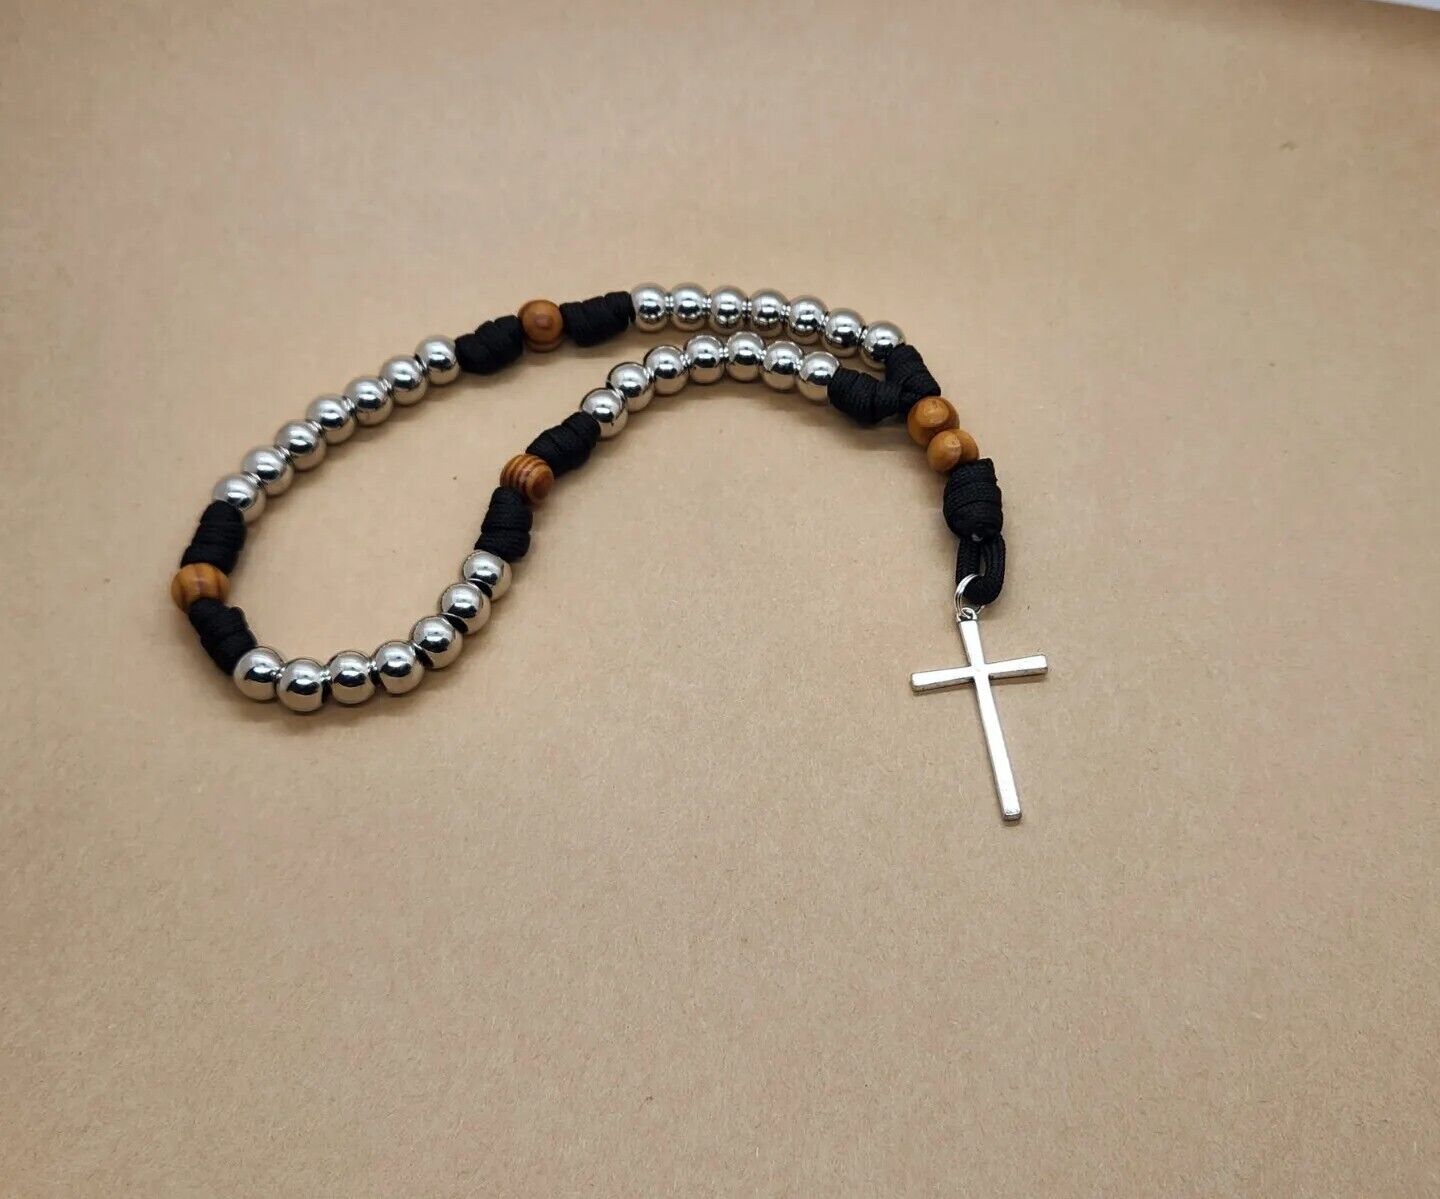 Paracord Anglican rosary, Protestant prayer beads